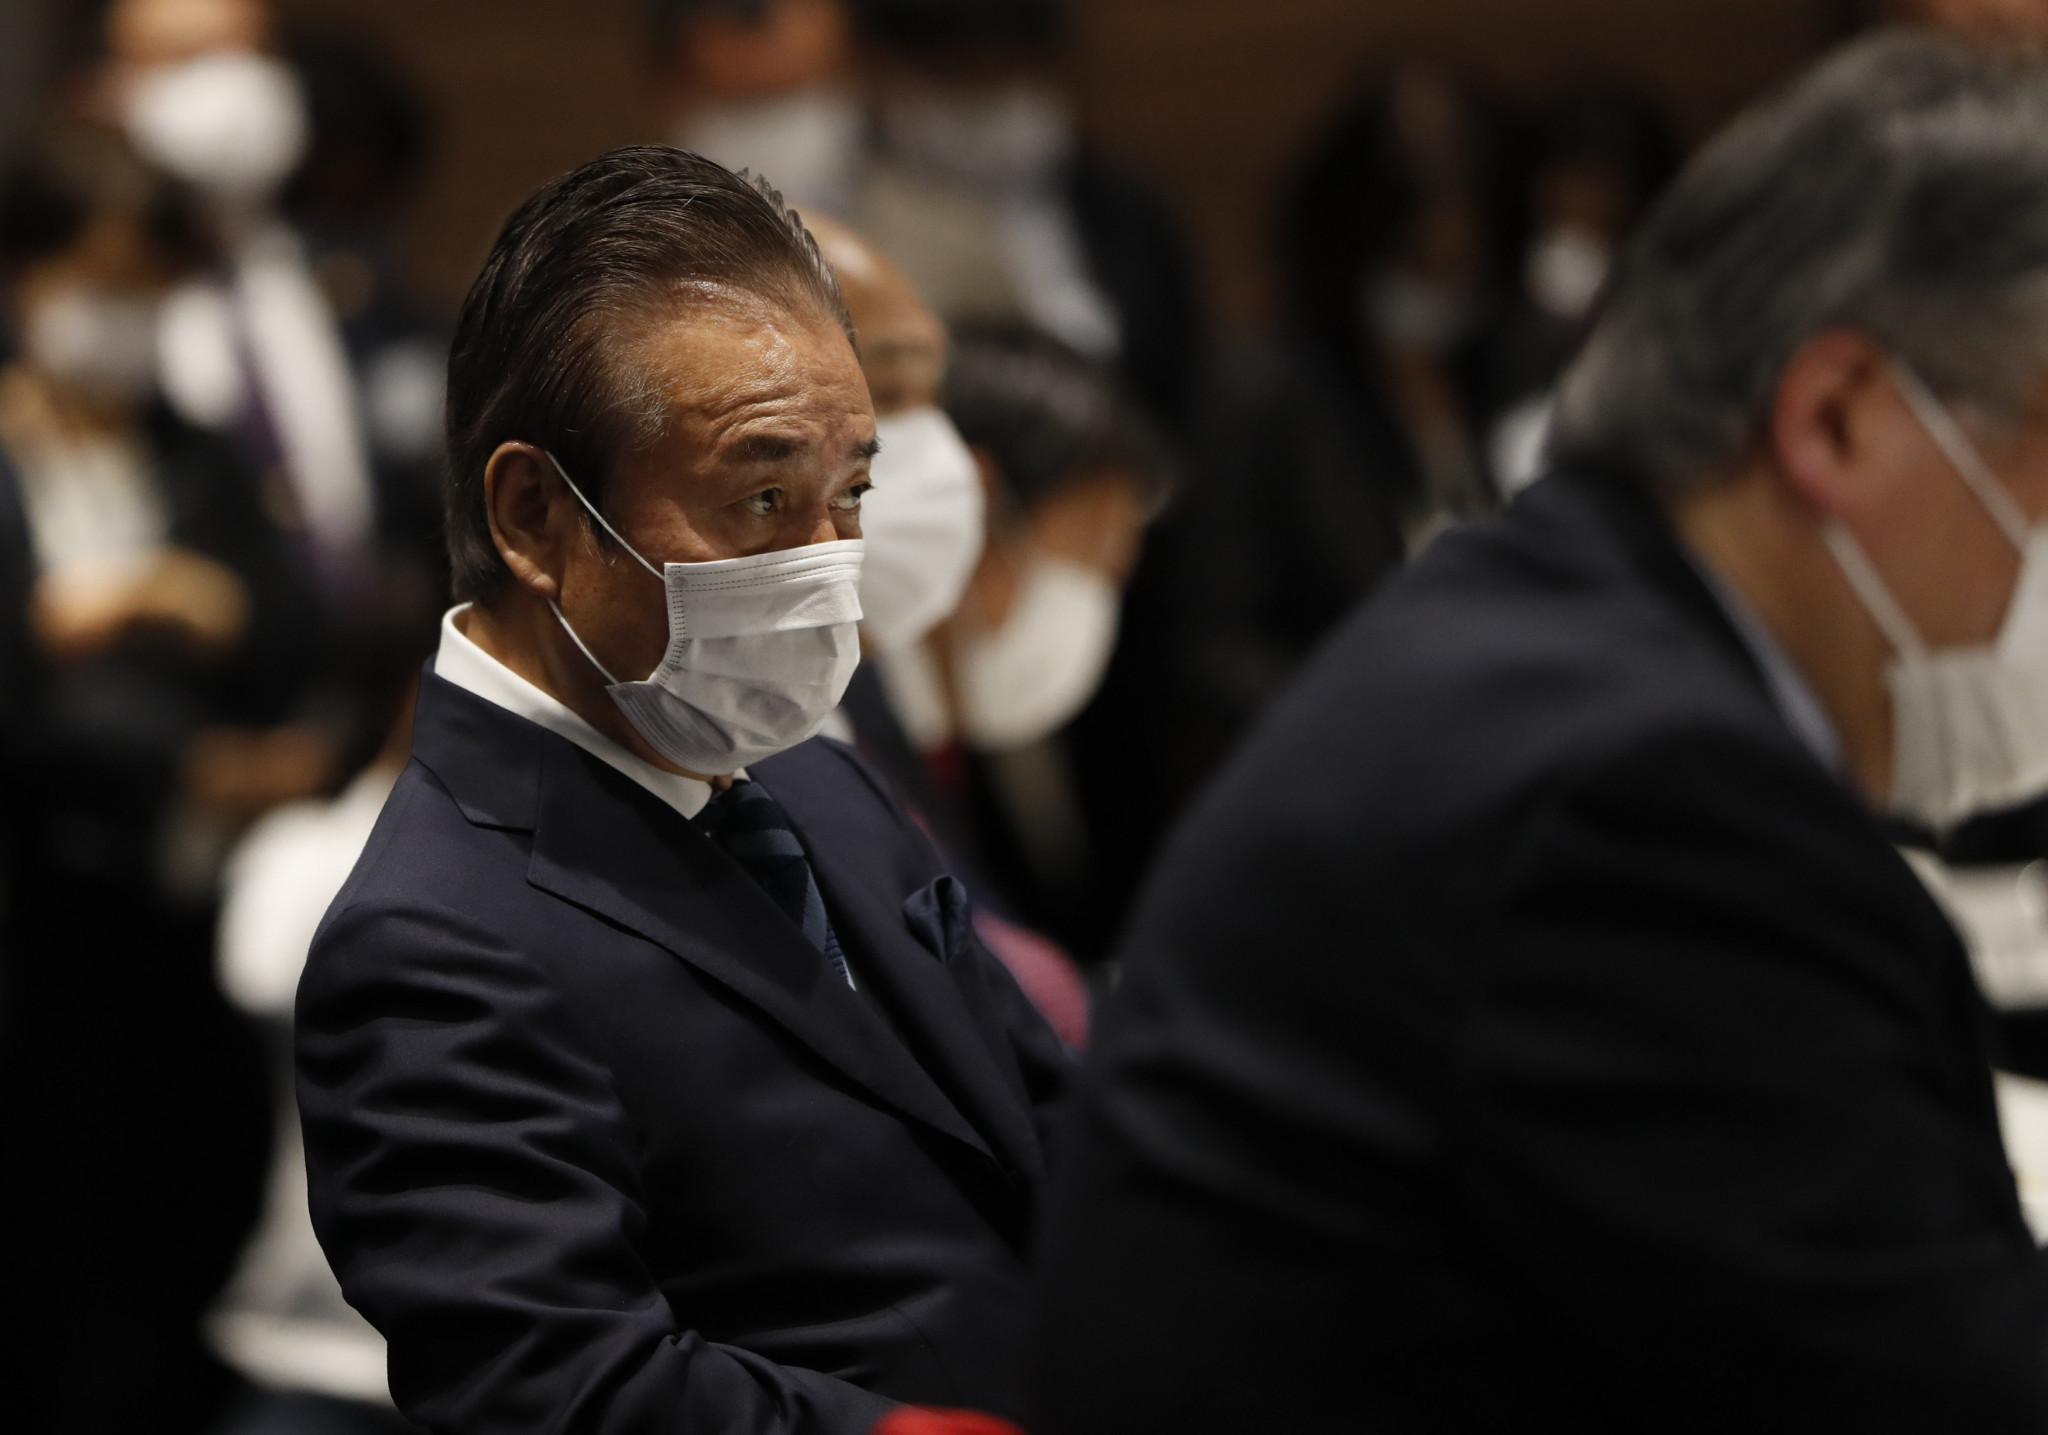 Tokyo 2020 Executive Board member Haruyuki Takahashi has been served with four charges of accepting bribes but has denied the allegations ©Getty Images